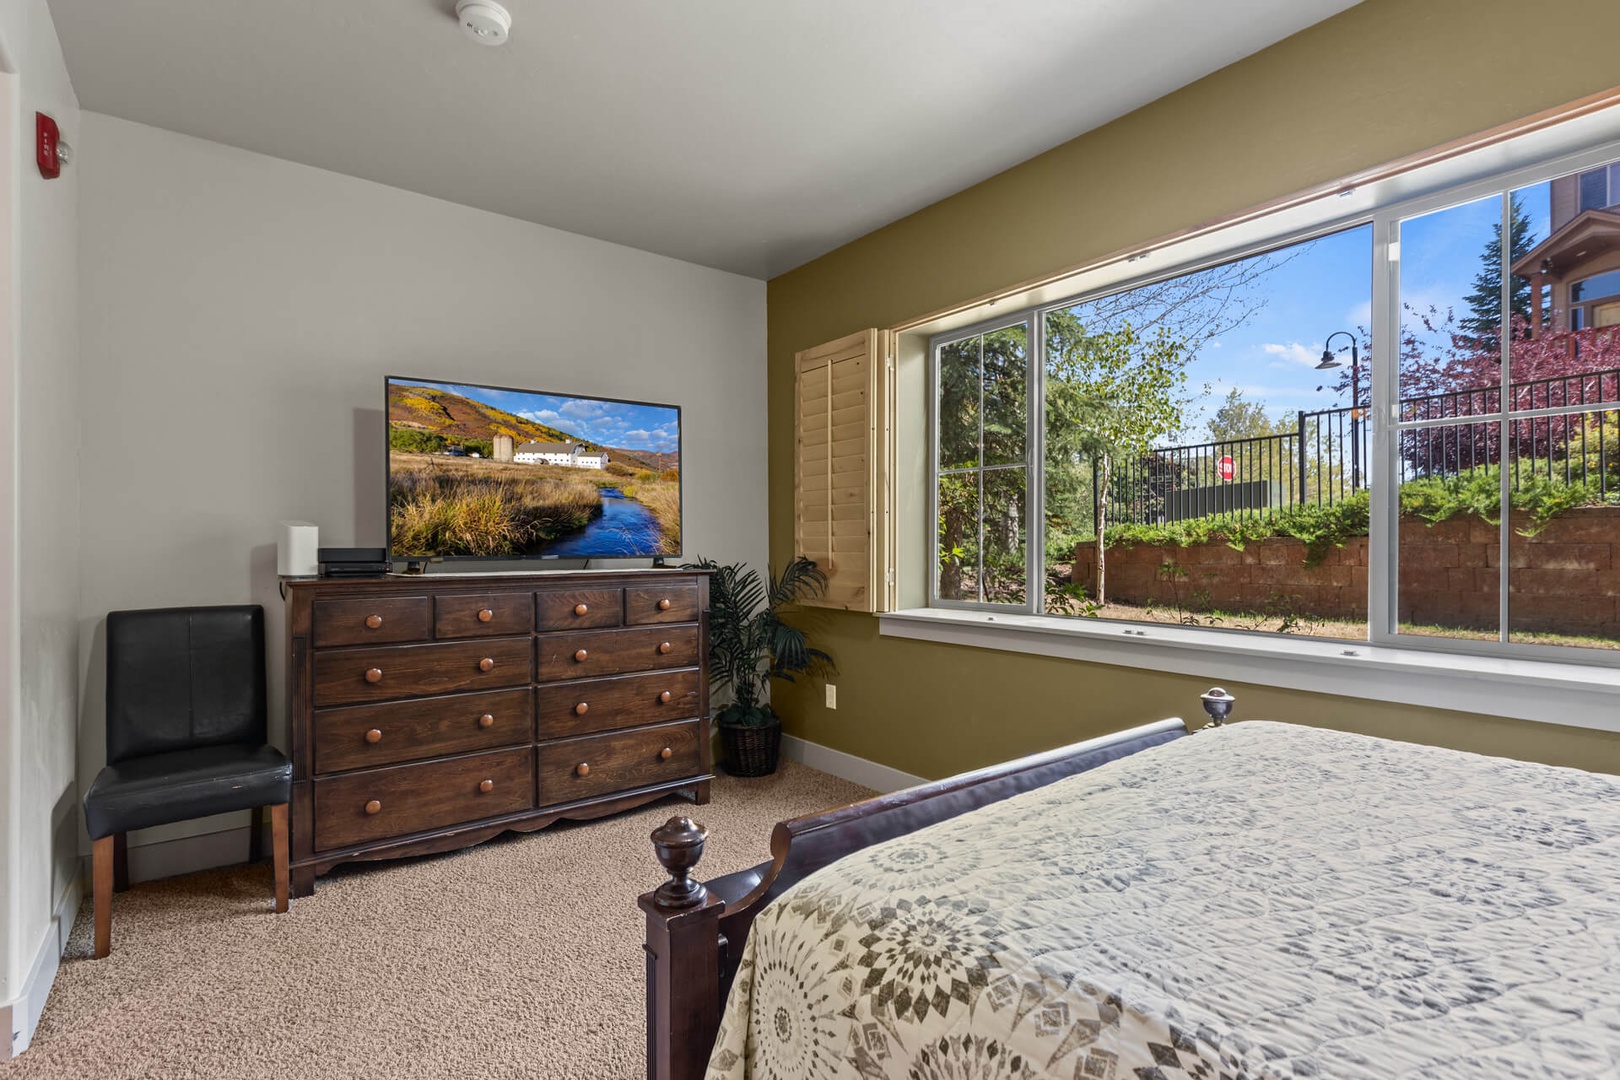 Bear Hollow Lodges 4201: The Master bedroom with a gorgeous view.